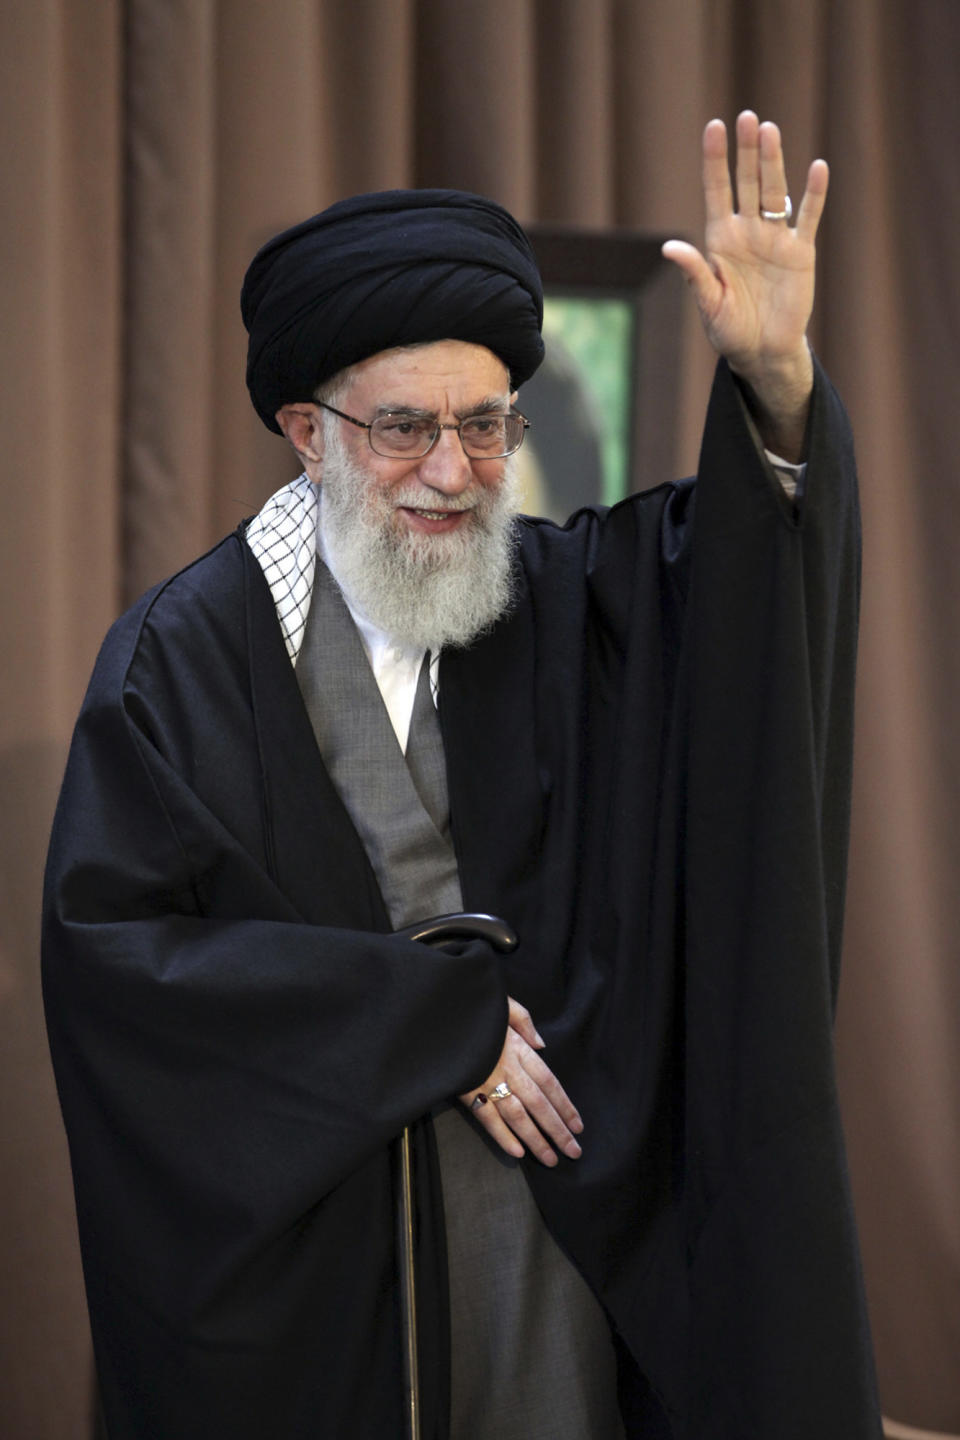 In this picture released by an official website of the office of the Iranian supreme leader, Supreme Leader Ayatollah Ali Khamenei, waves to the audience before giving a speech at a public gathering in the city of Mashhad, Iran, Friday, March 21, 2014. Iran's top leader says his nation can best counter sanctions imposed by the West by strengthening its economy. Khamenei said Iranians should not wait for the sanctions to be lifted but work to build a stronger economy to "reduce vulnerability." (AP Photo/Office of the Iranian Supreme Leader)